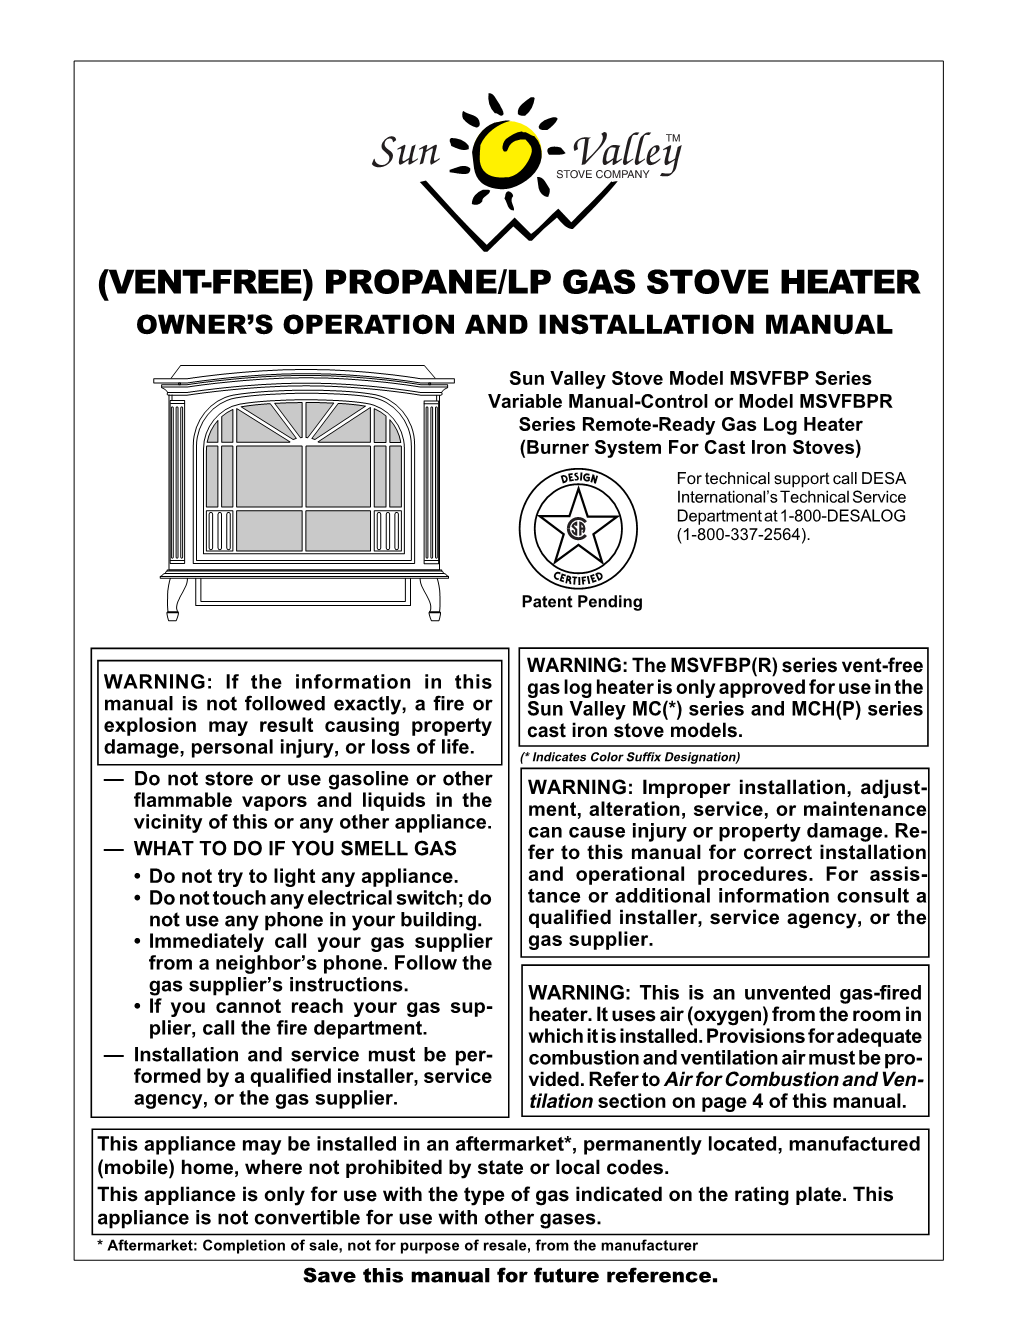 (Vent-Free) Propane/Lp Gas Stove Heater Owner’S Operation and Installation Manual